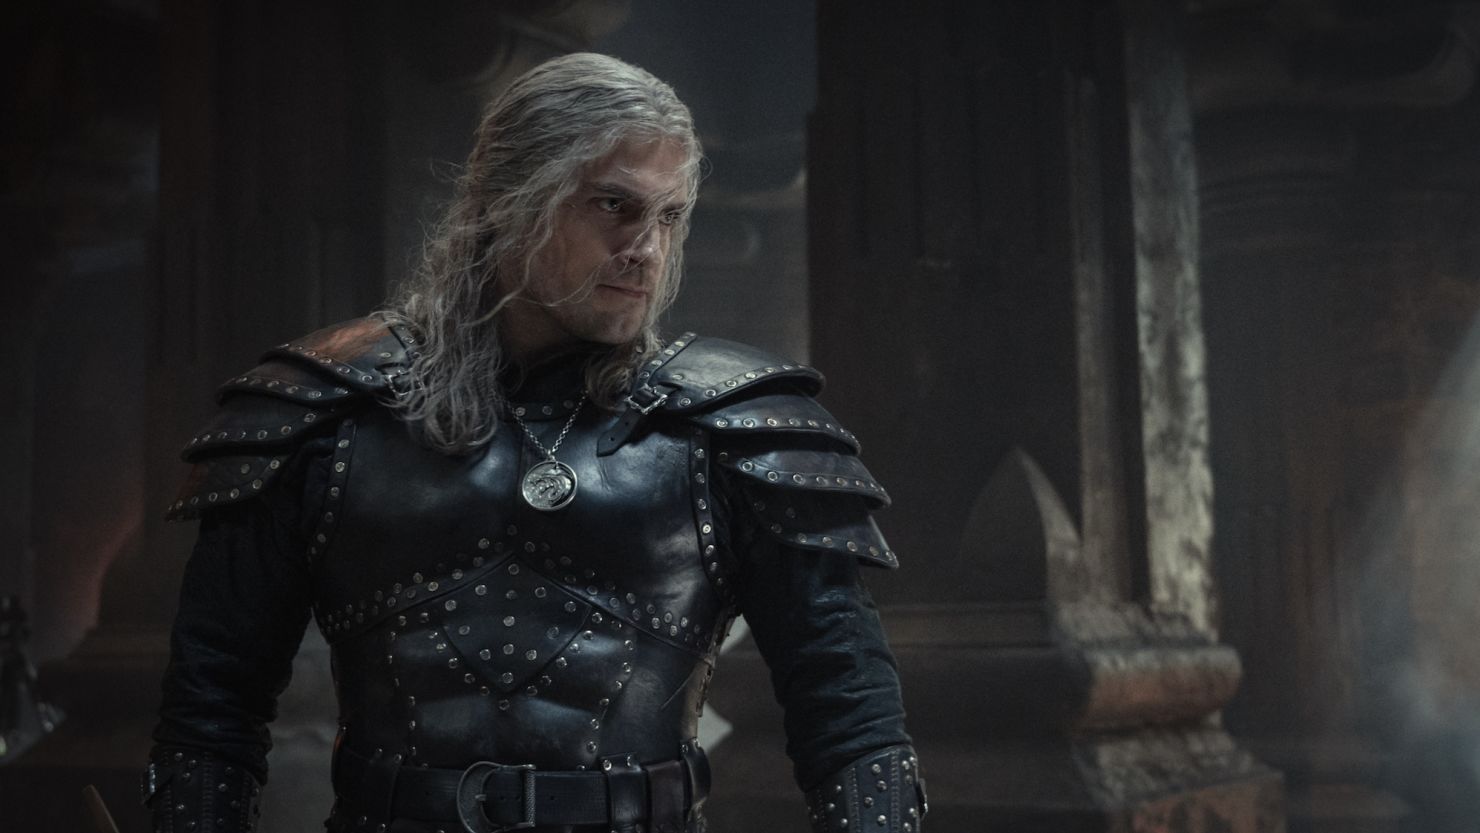 Henry Cavill accused of toxic behavior towards women on 'The Witcher' set